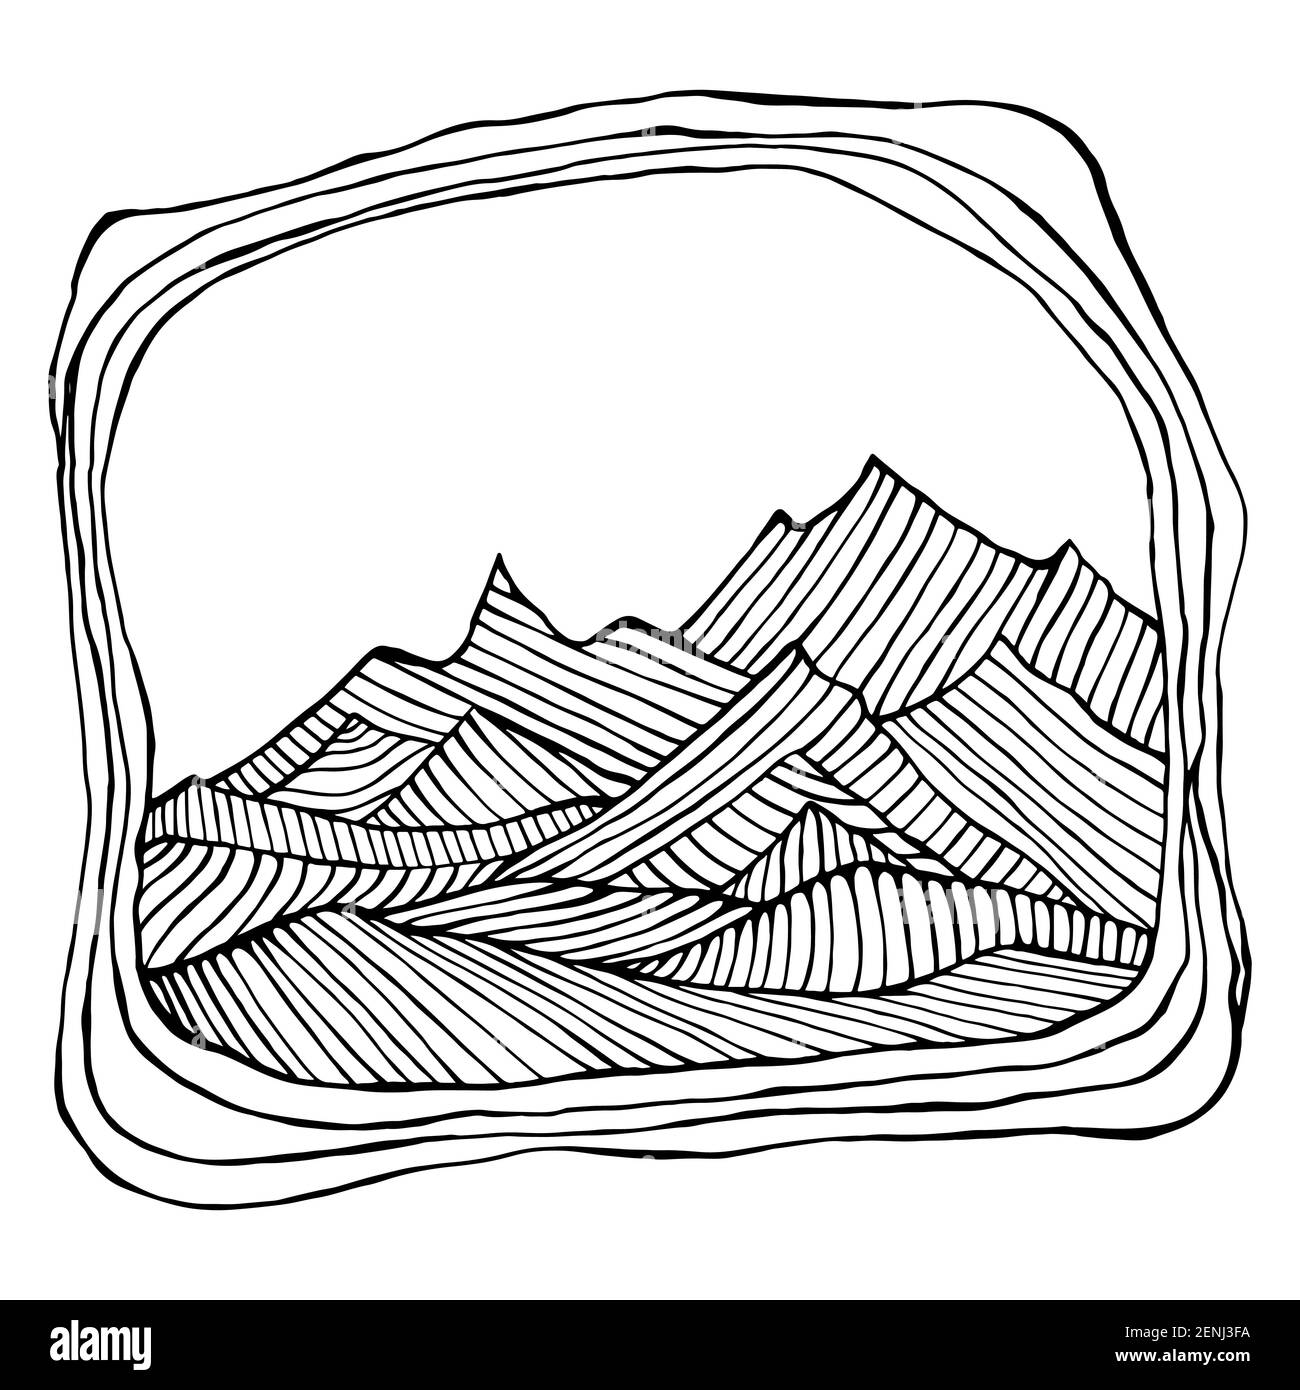 Coloring page surreal landscape with mountains. Vector hand drawn illustrations. Doodle cartoon style. Fantasy psychedelic art. Stock Vector